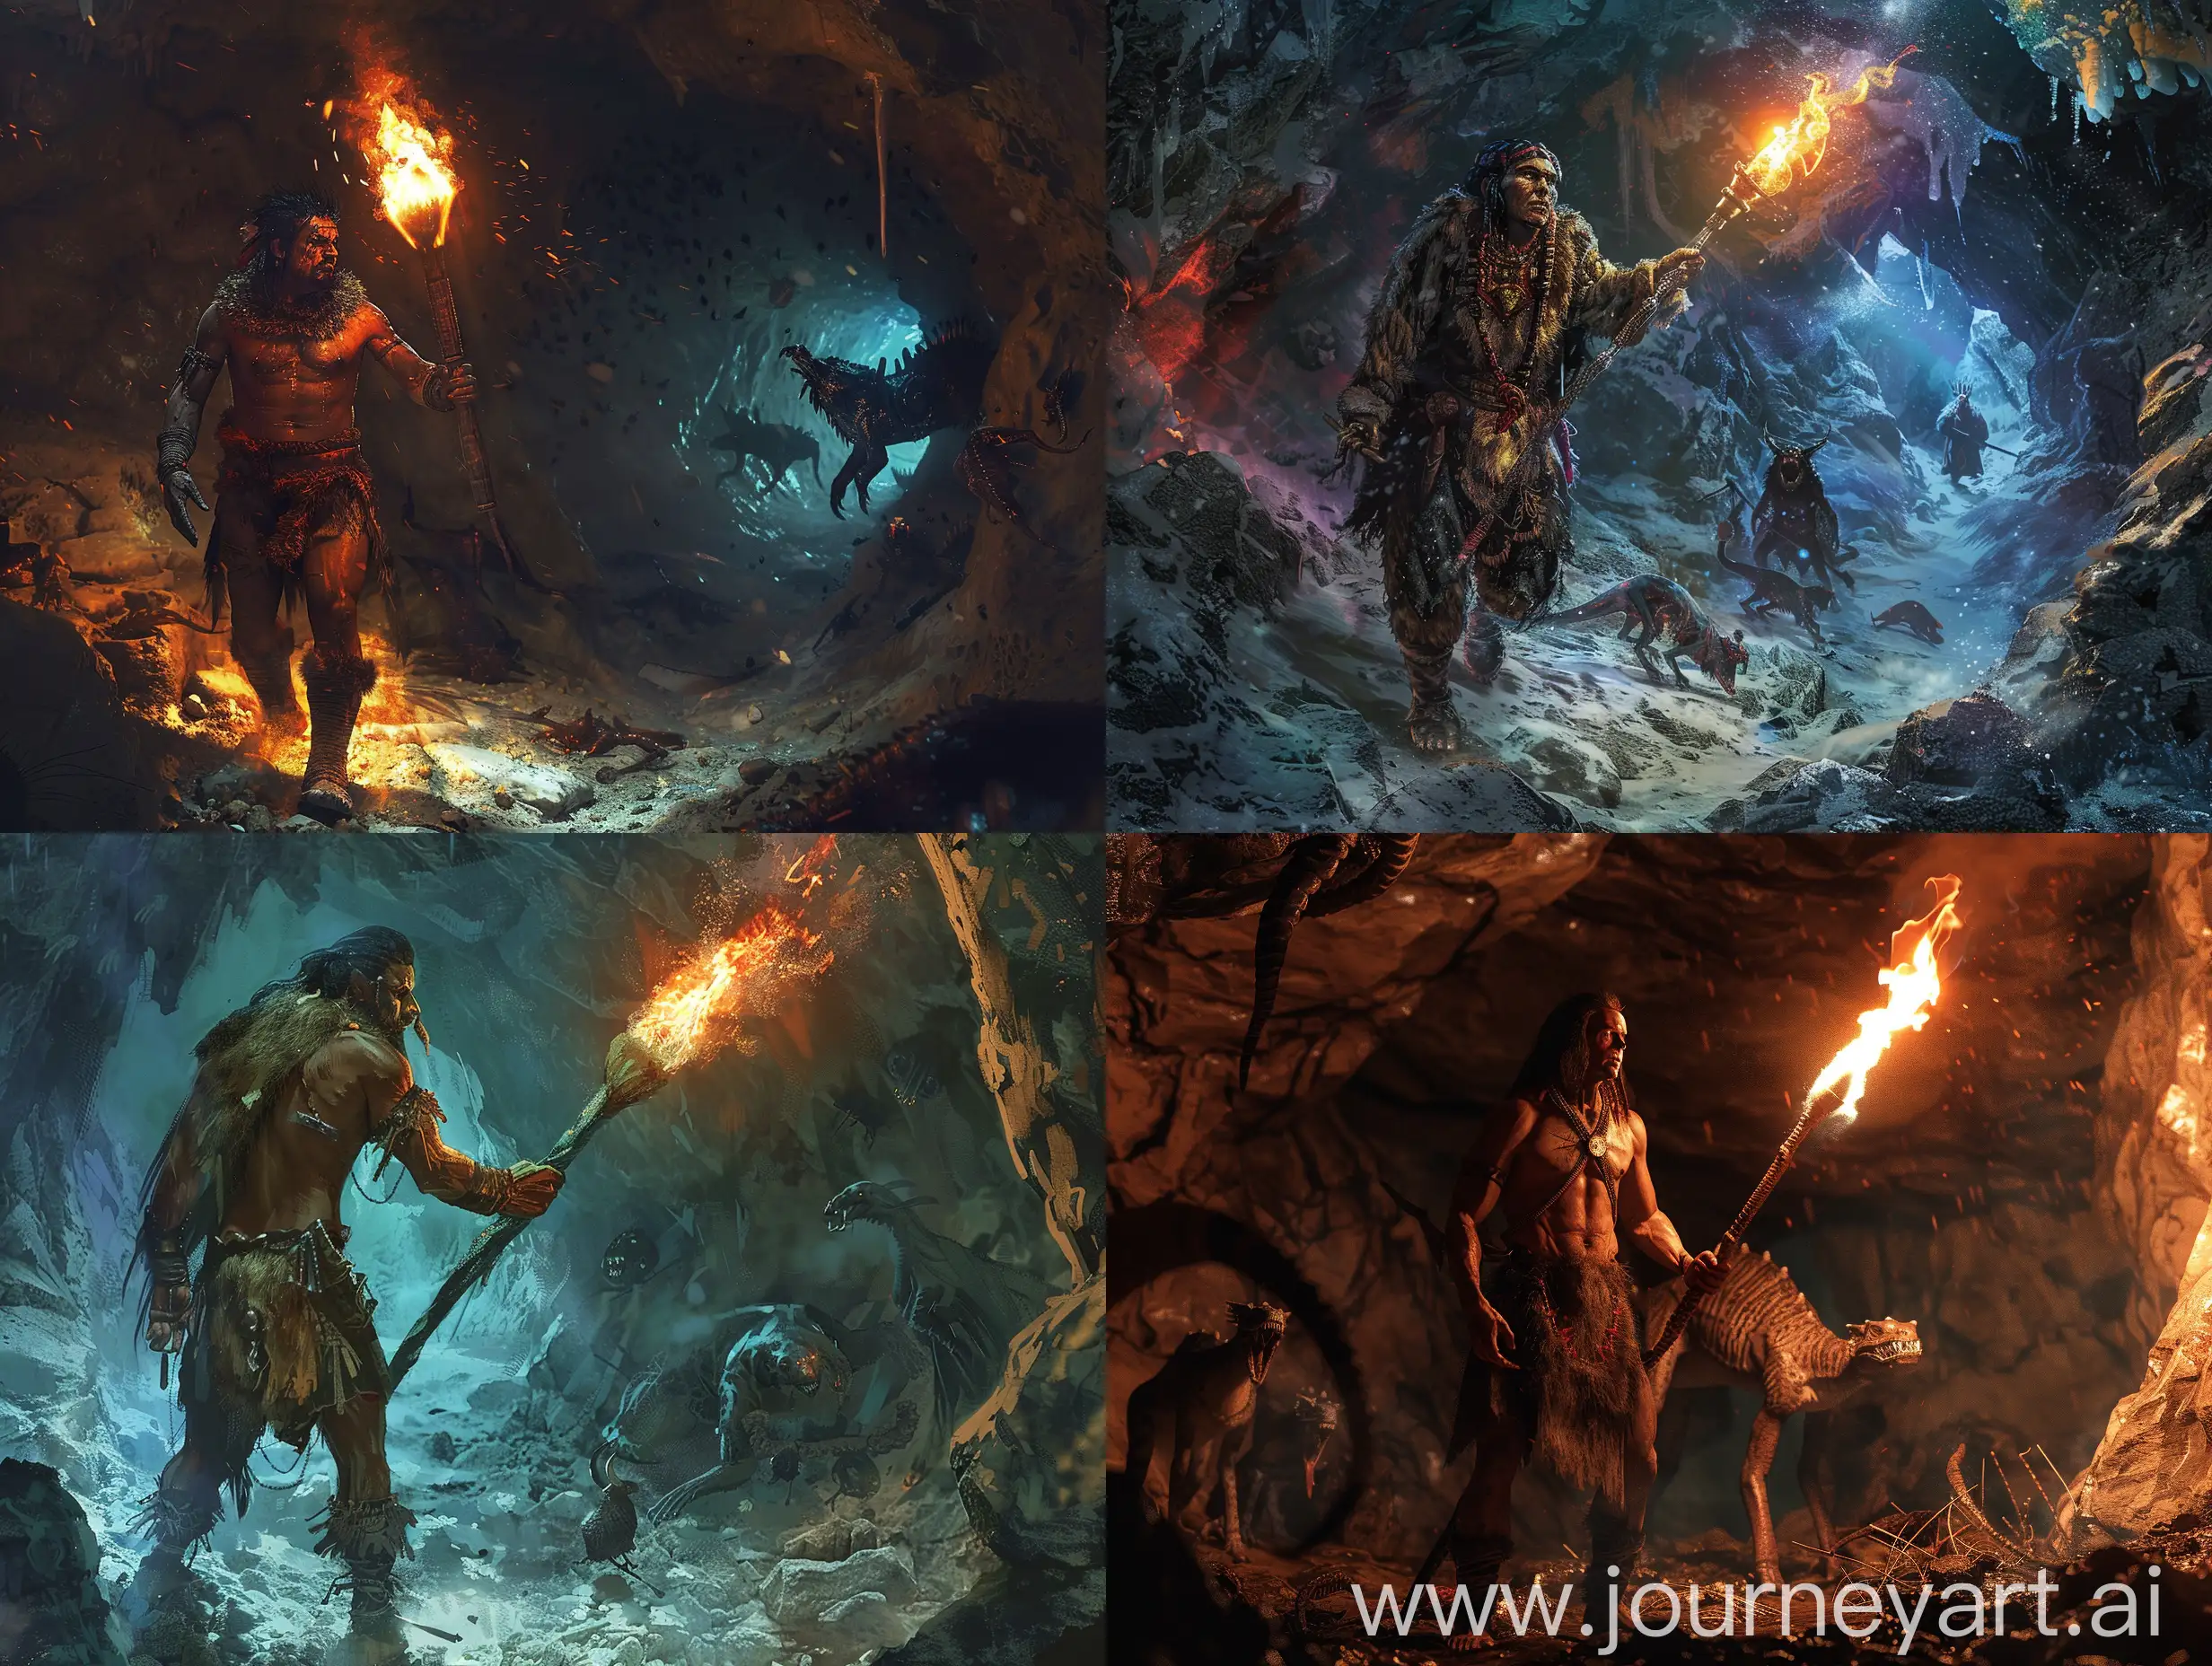 A handsome and strong altaic shaman wandering in the depths of the underworld with a big torch, lighting his way and seeing strange creatures all around, photorealistic, very detailed and cinematic